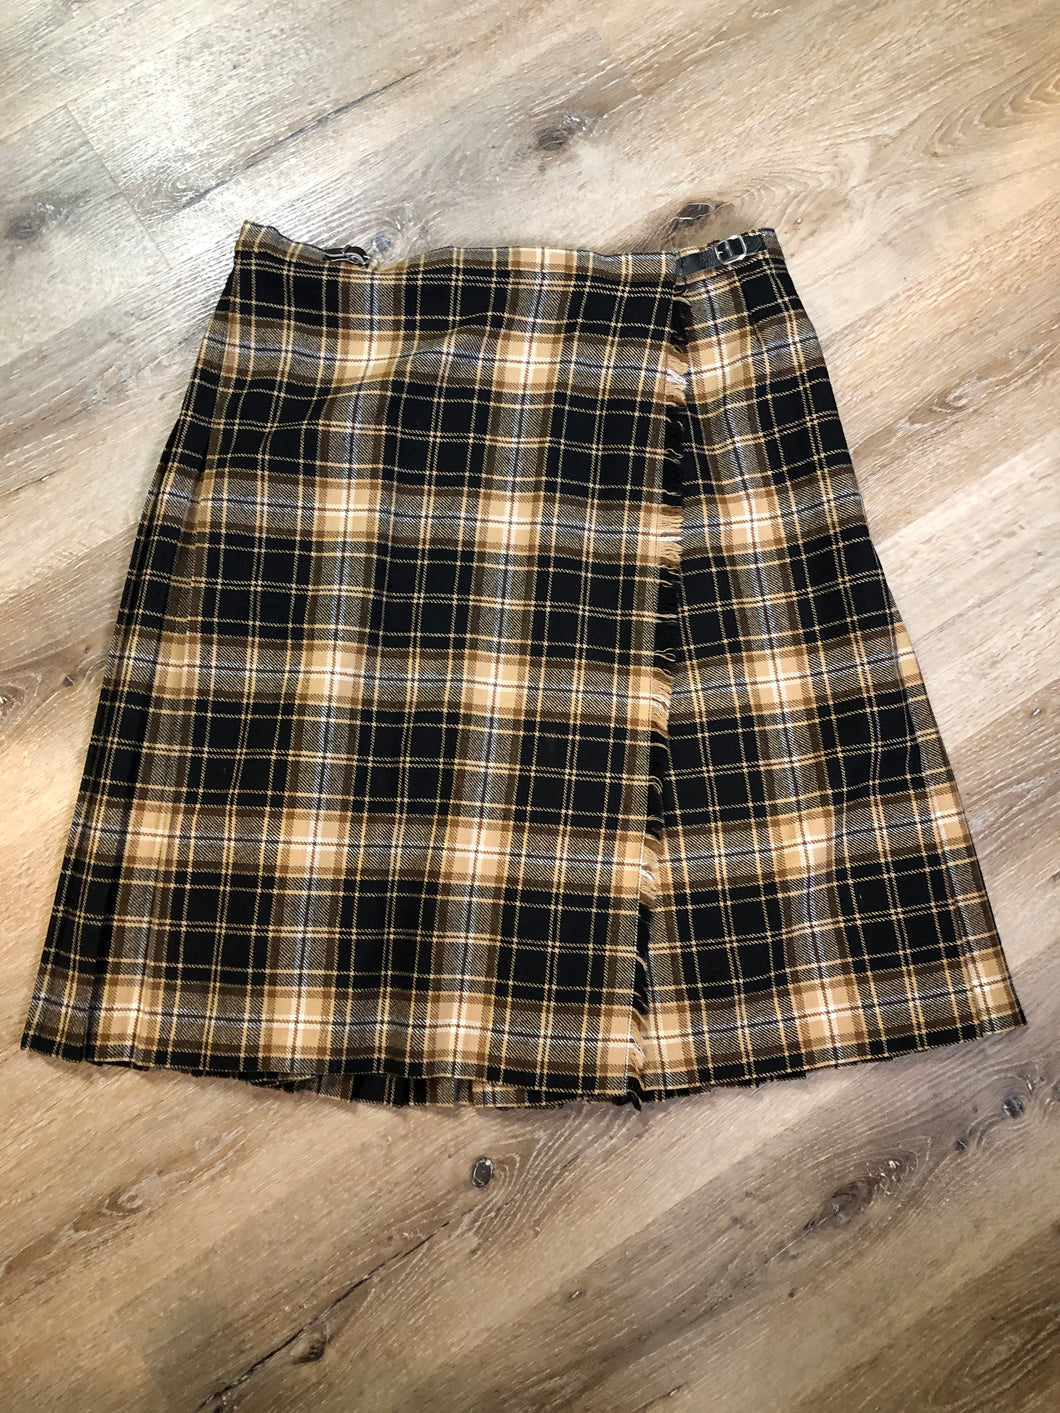 Kingspier Vintage - Pitlochry Knitwear black, white and brown plaid 100% wool kilt.